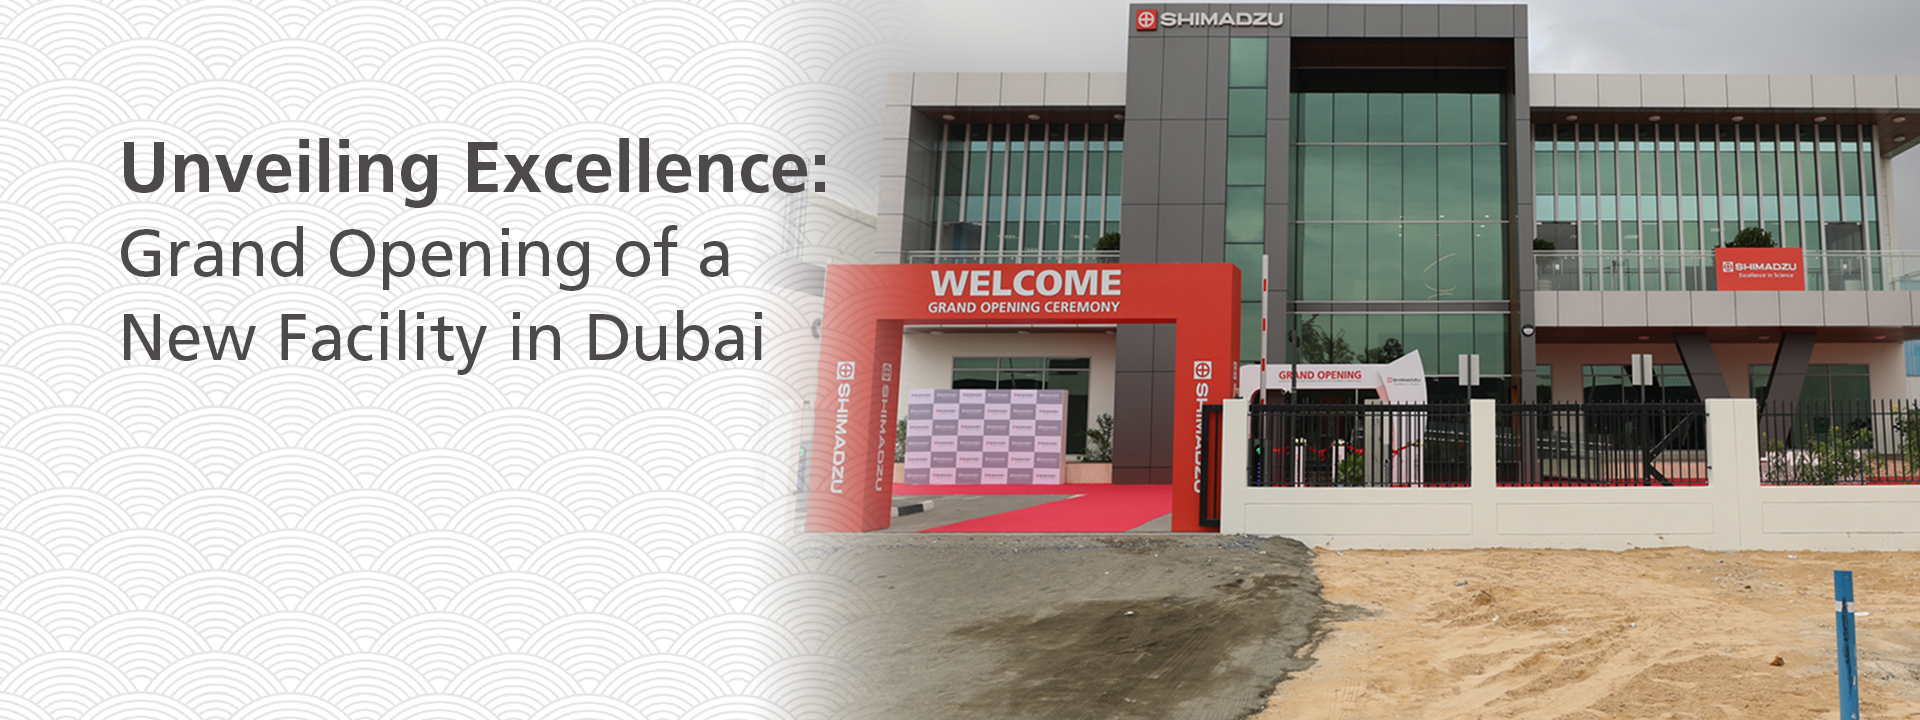 New State-of-the-Art Facility in Dubai